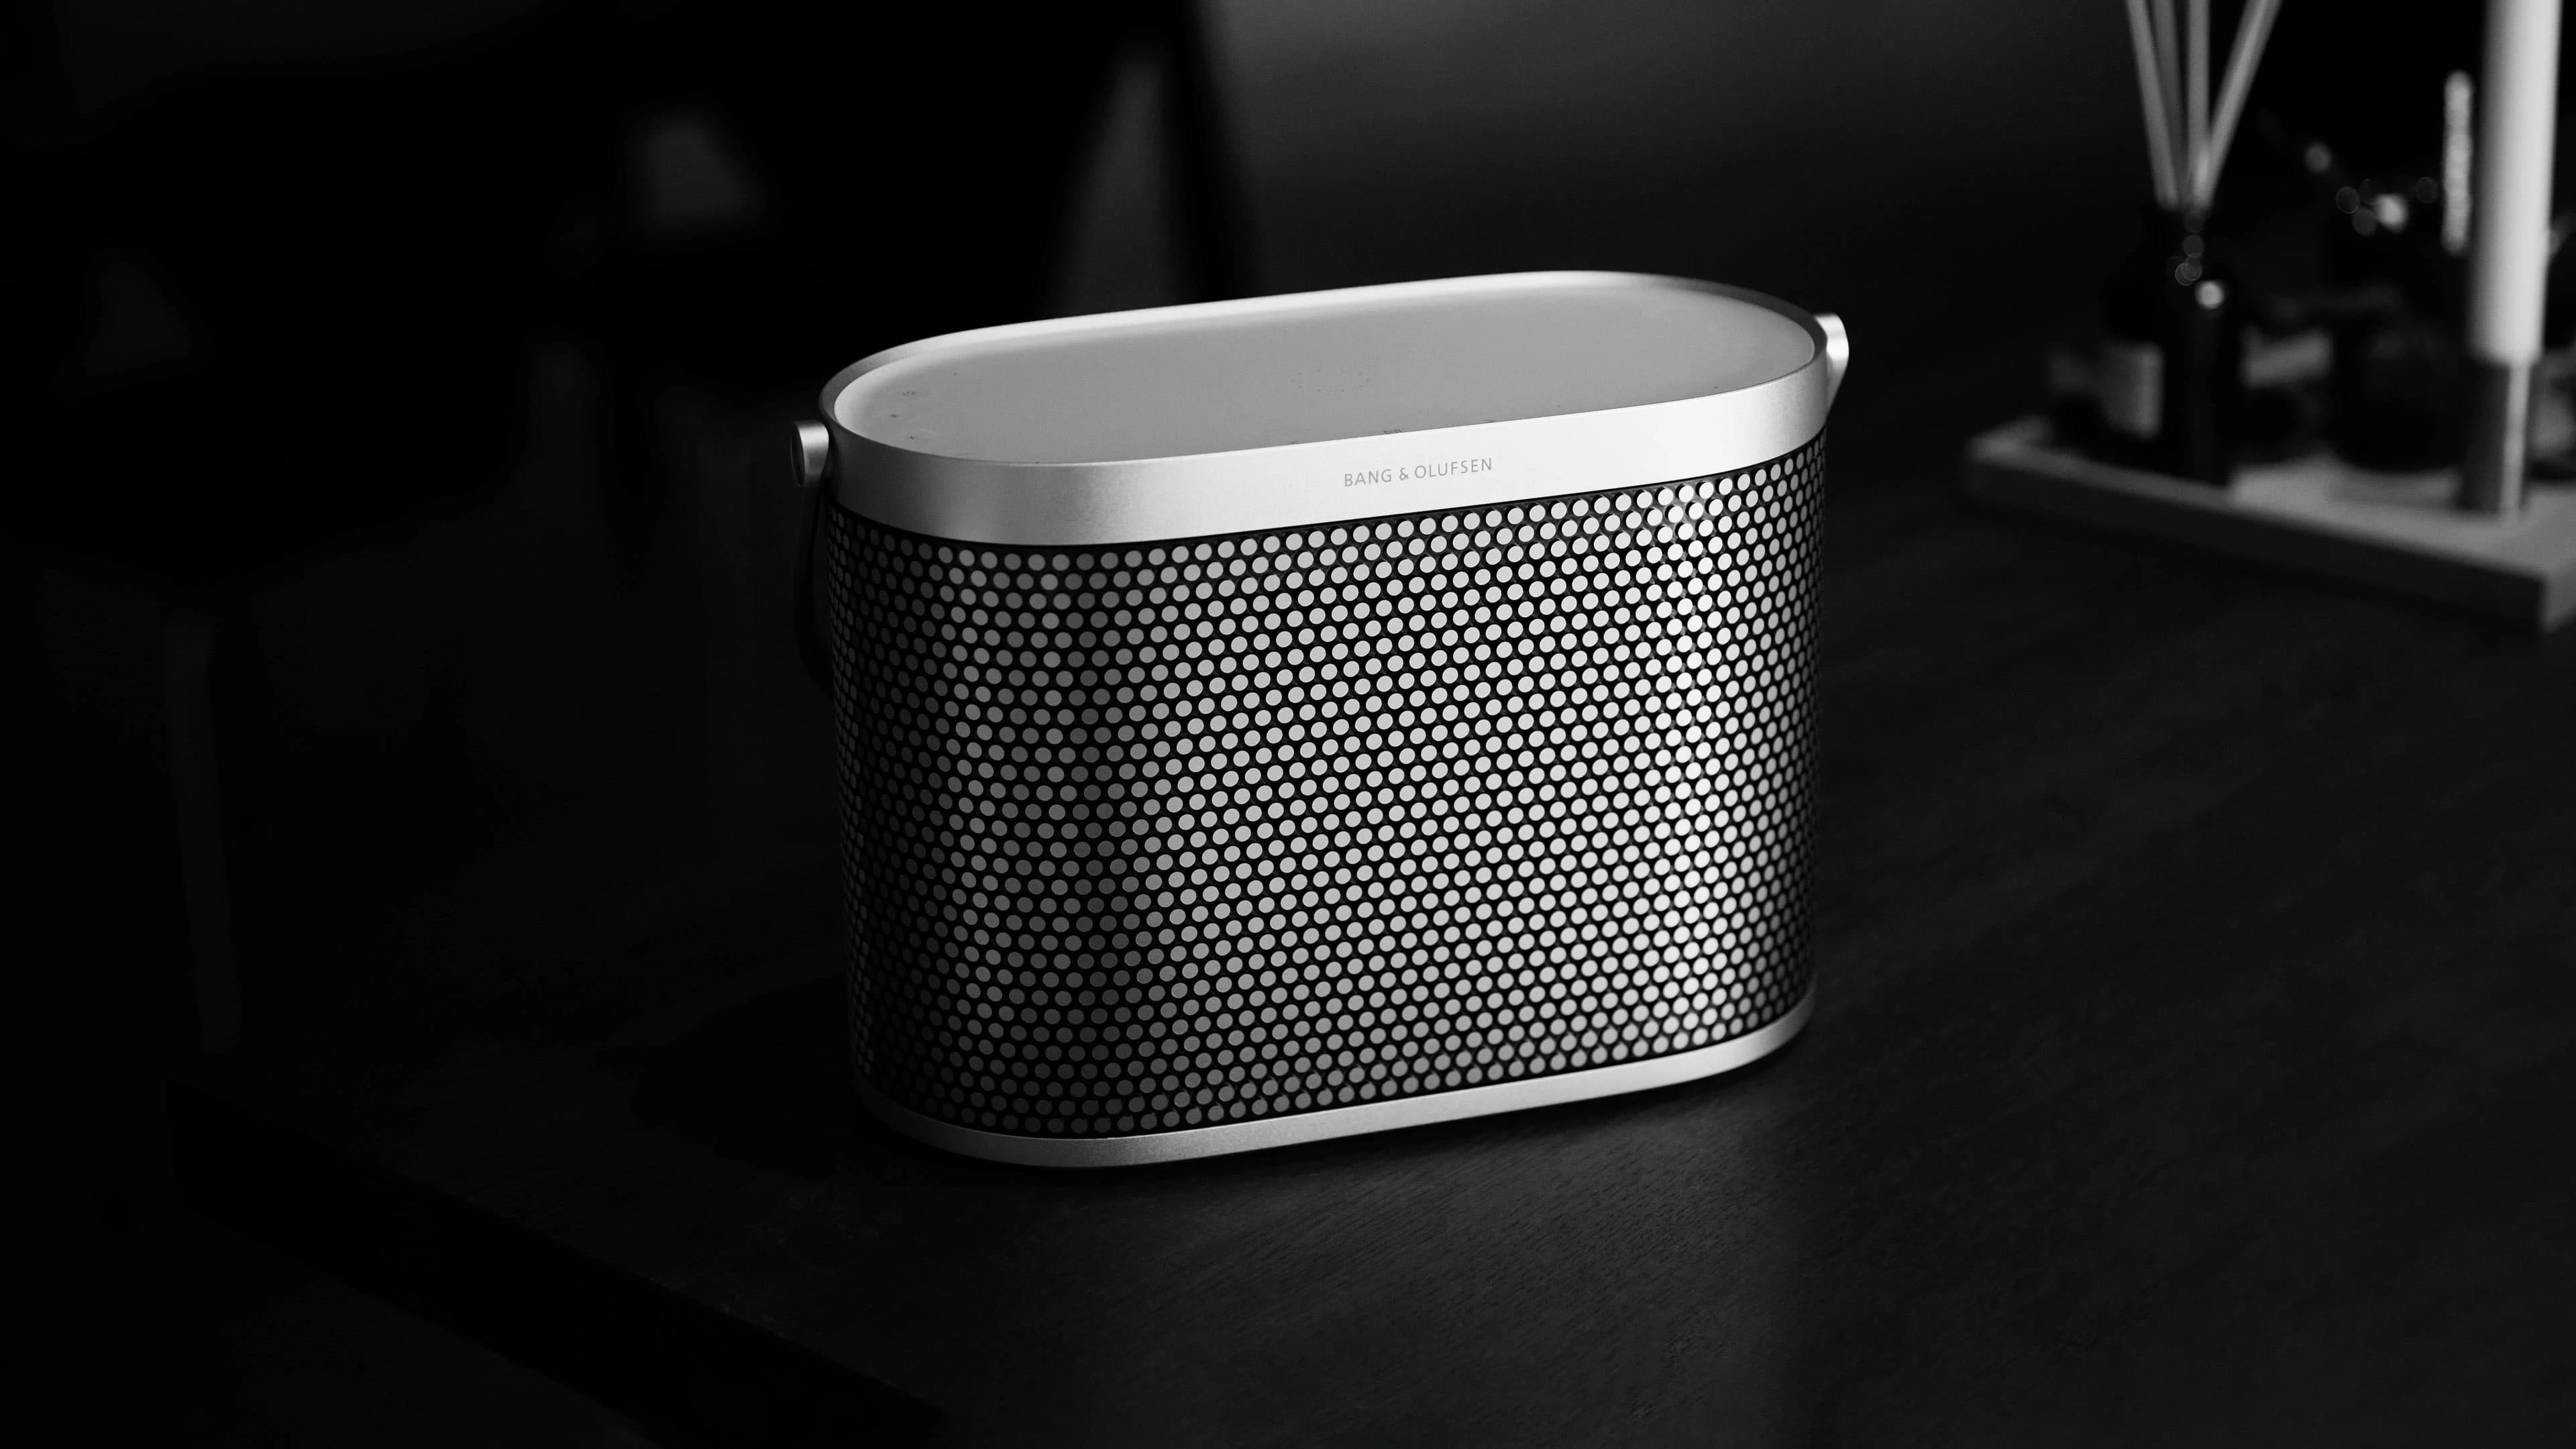 Full product image of the Beosound A5 speaker in Spaced Aluminium